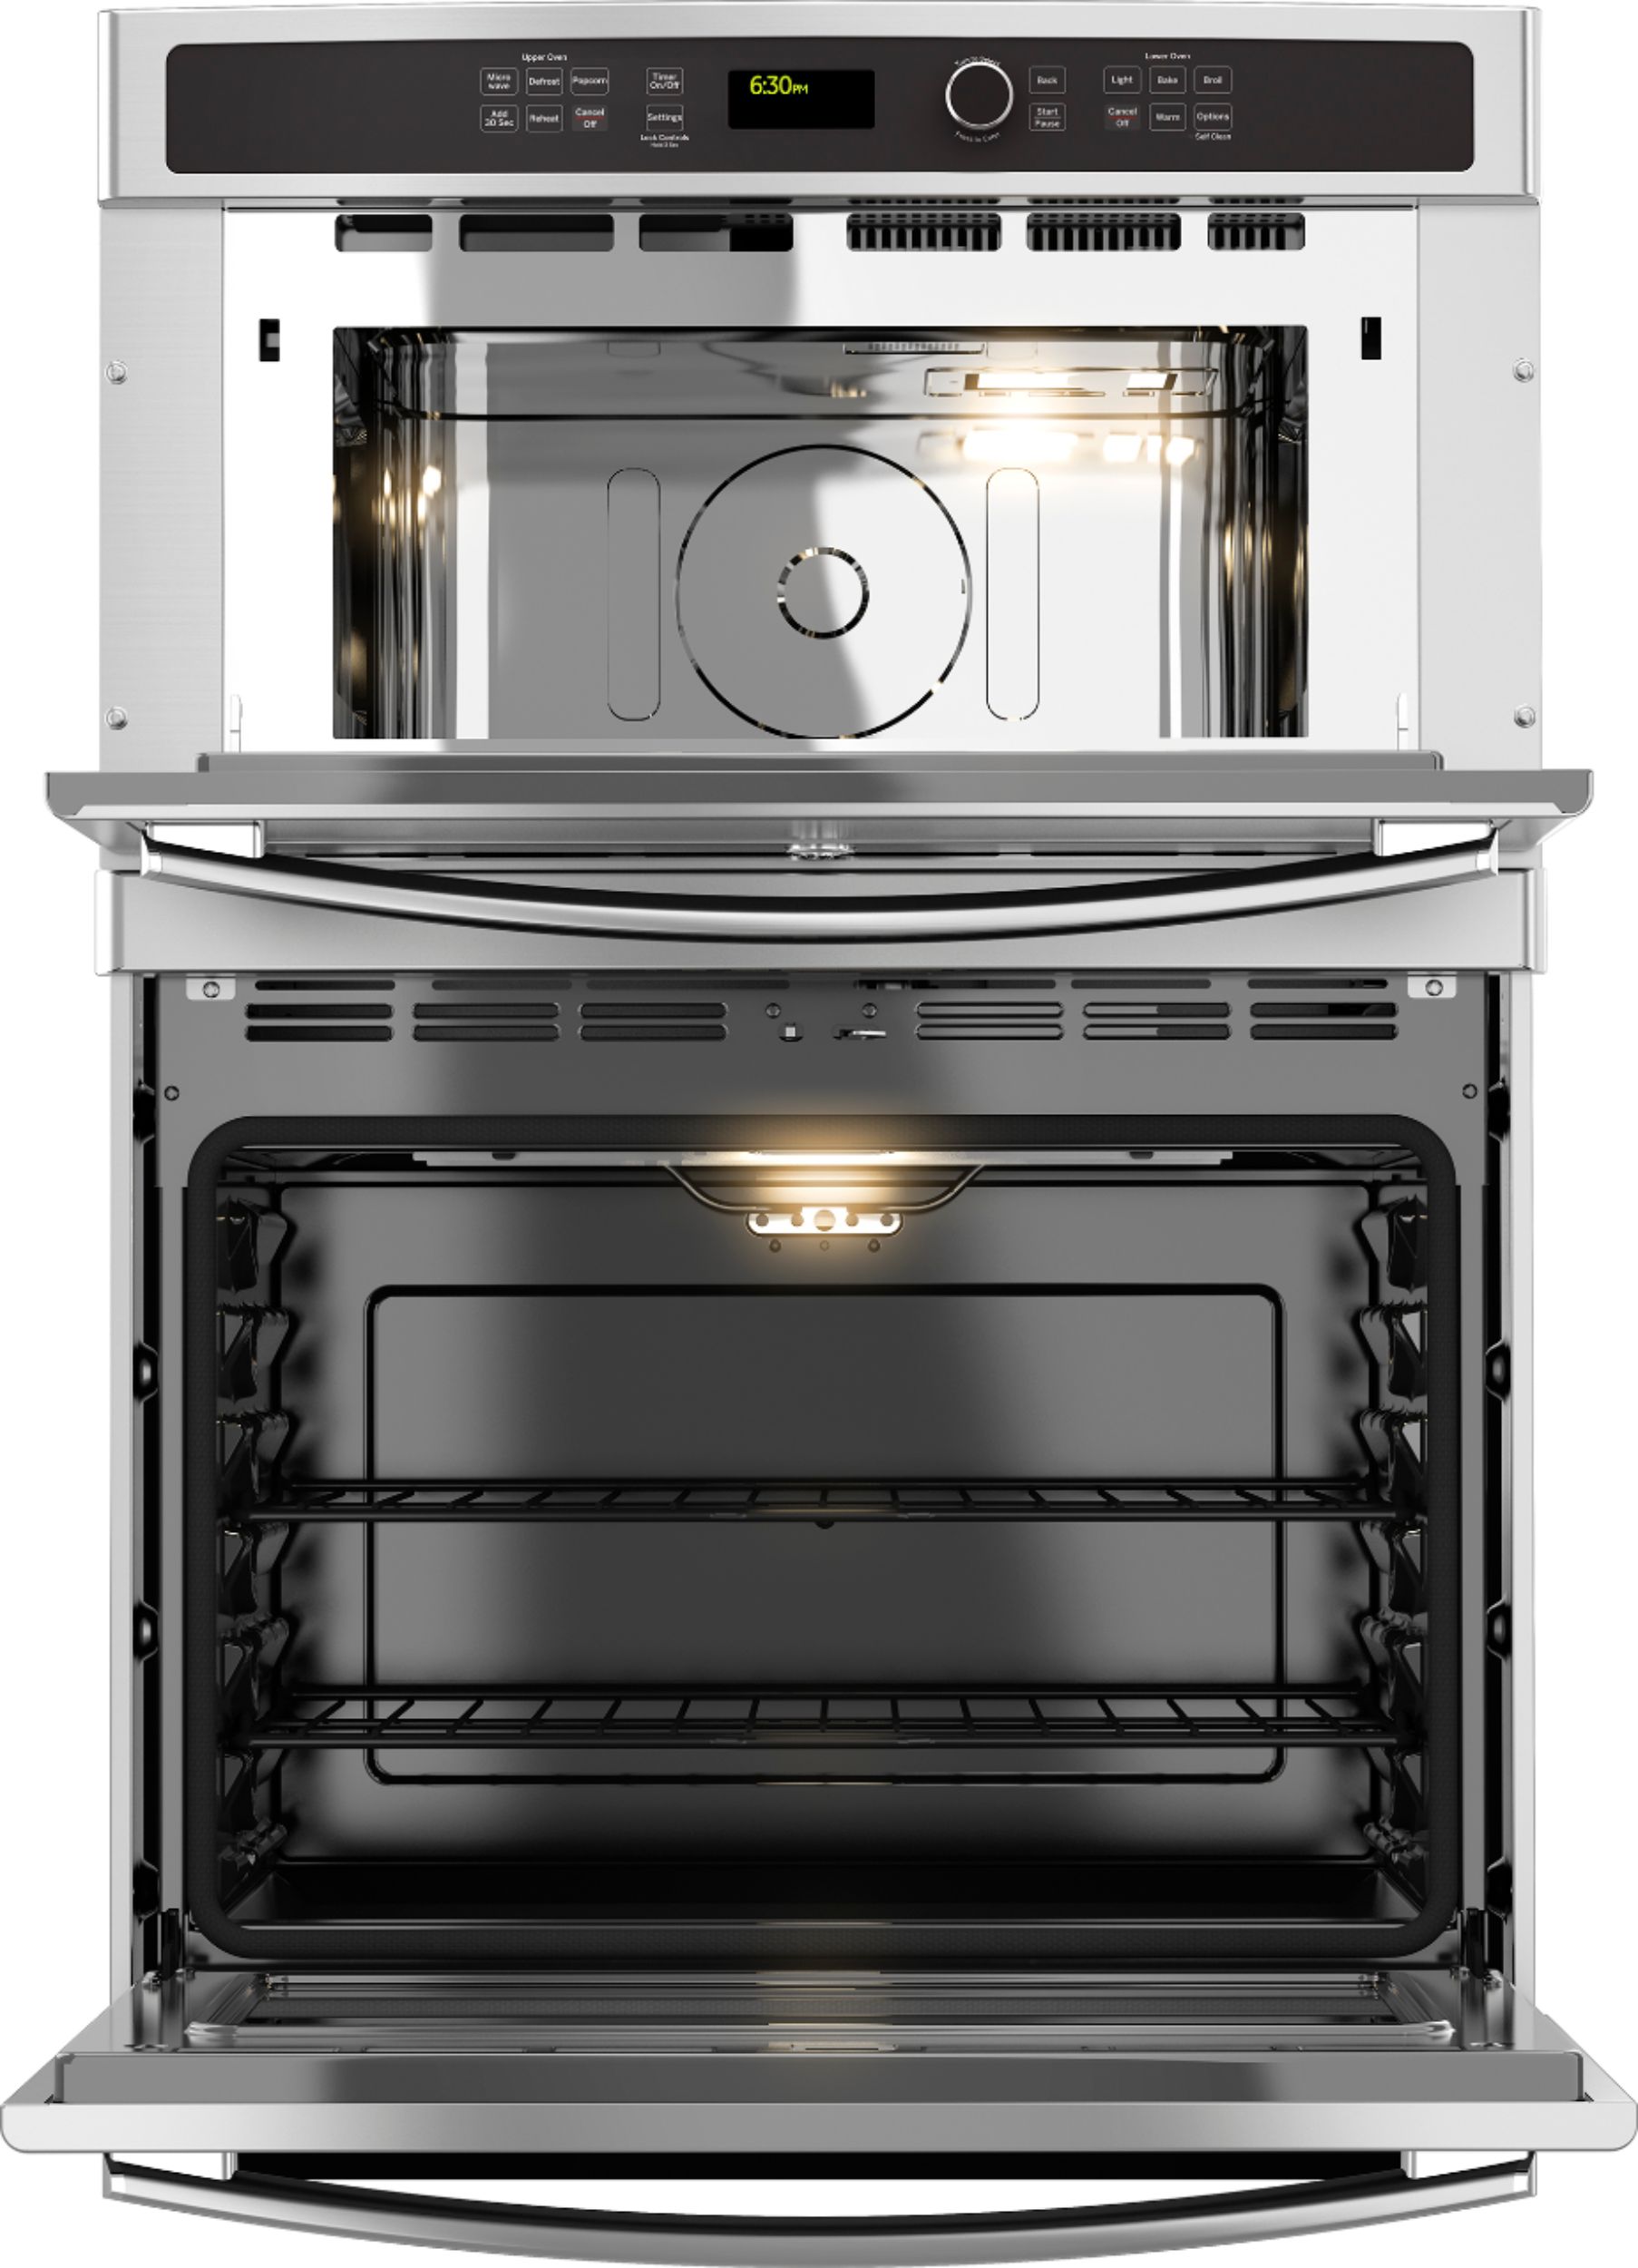 Angle View: GE Profile - Advantium 30" Built-In Single Electric Convection Over-the-Range Oven with Microwave - Stainless steel